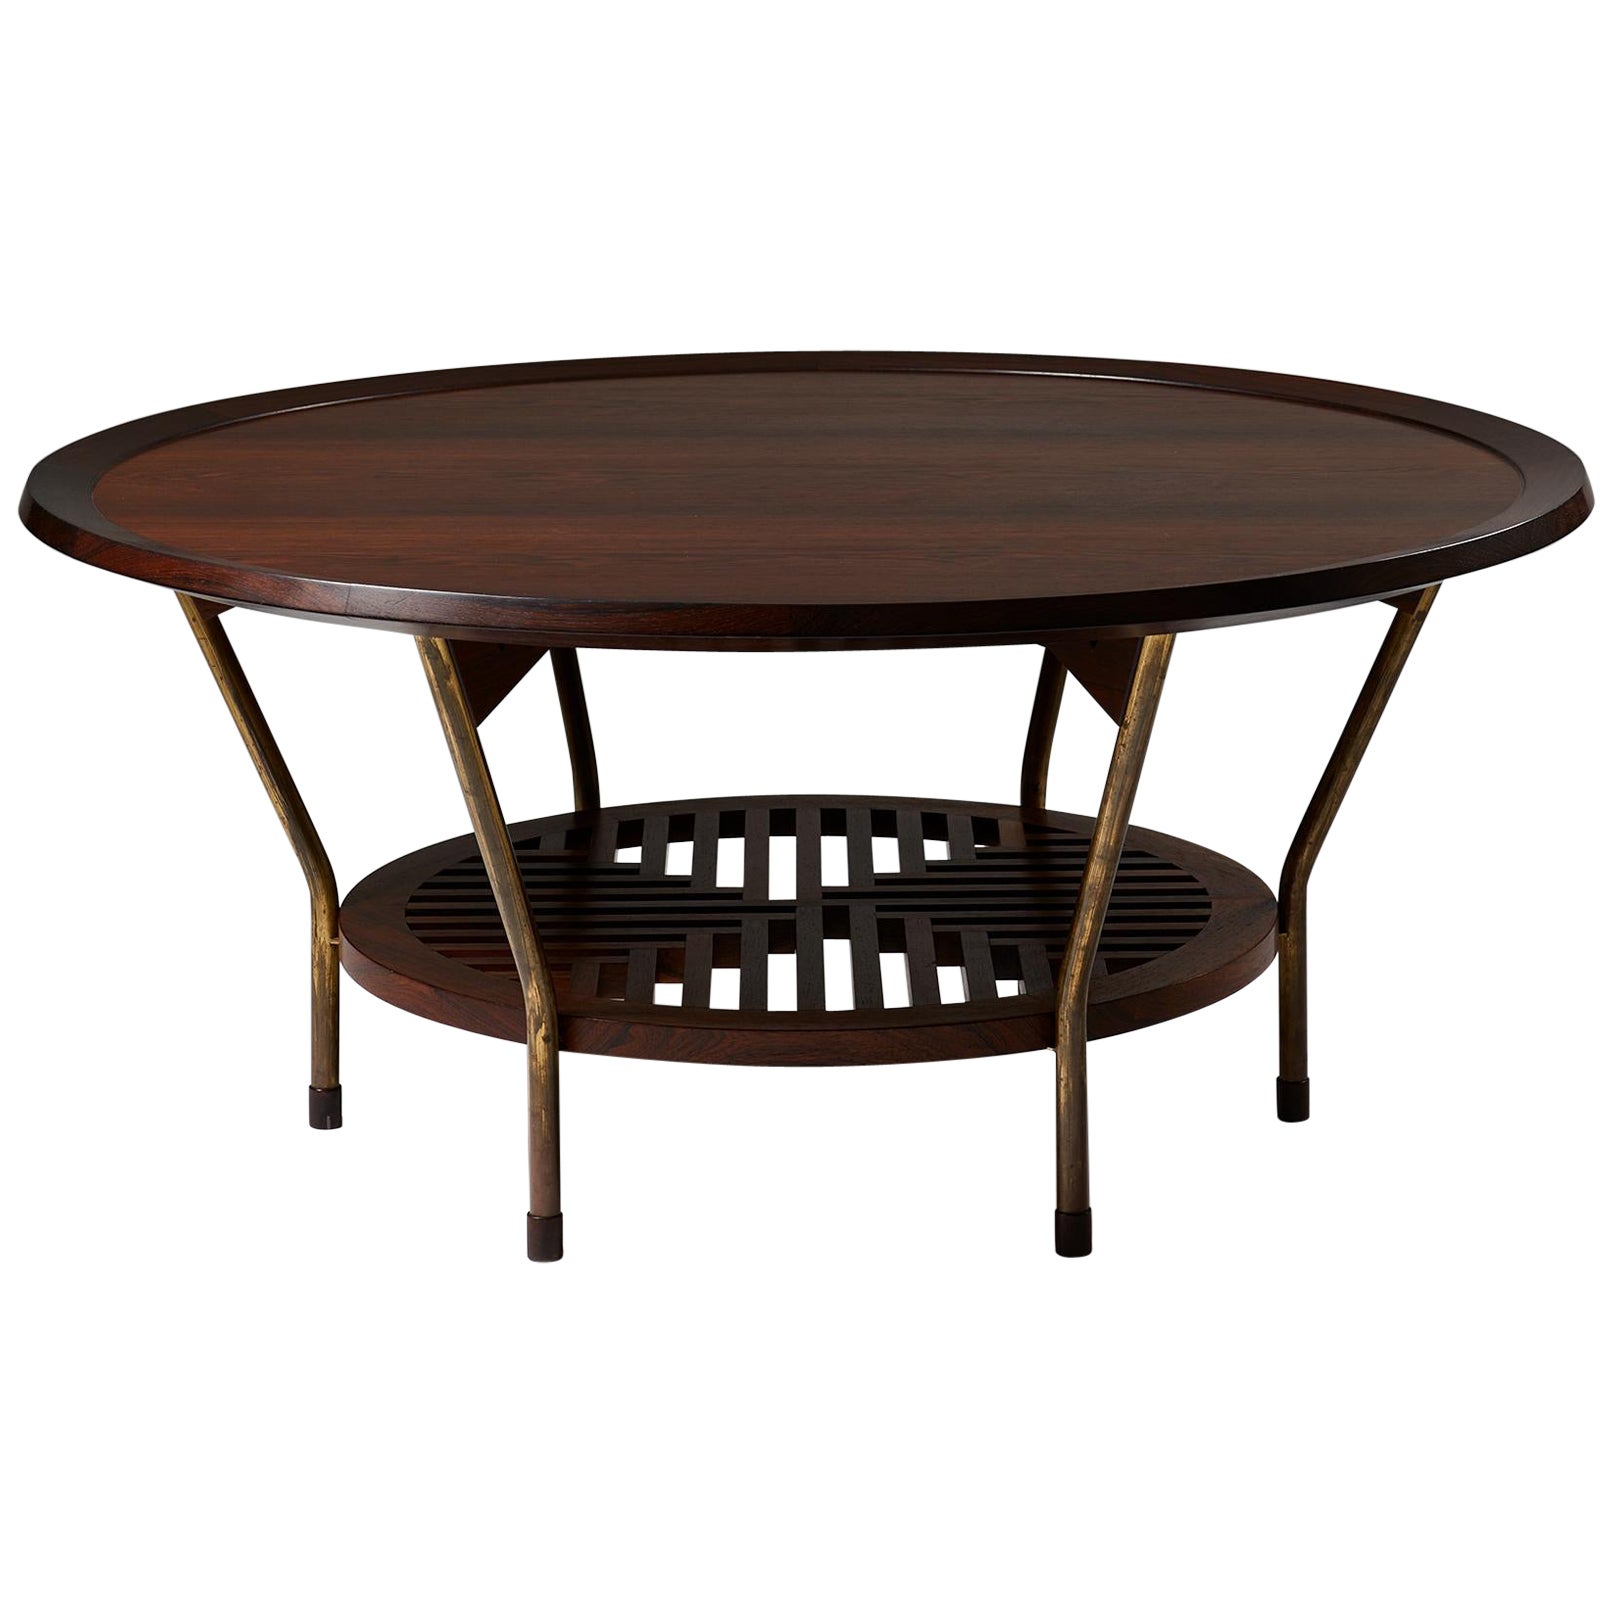 Occasional Table Designed by Frits Schlegel, Rosewood and Brass, Denmark, 1949 For Sale